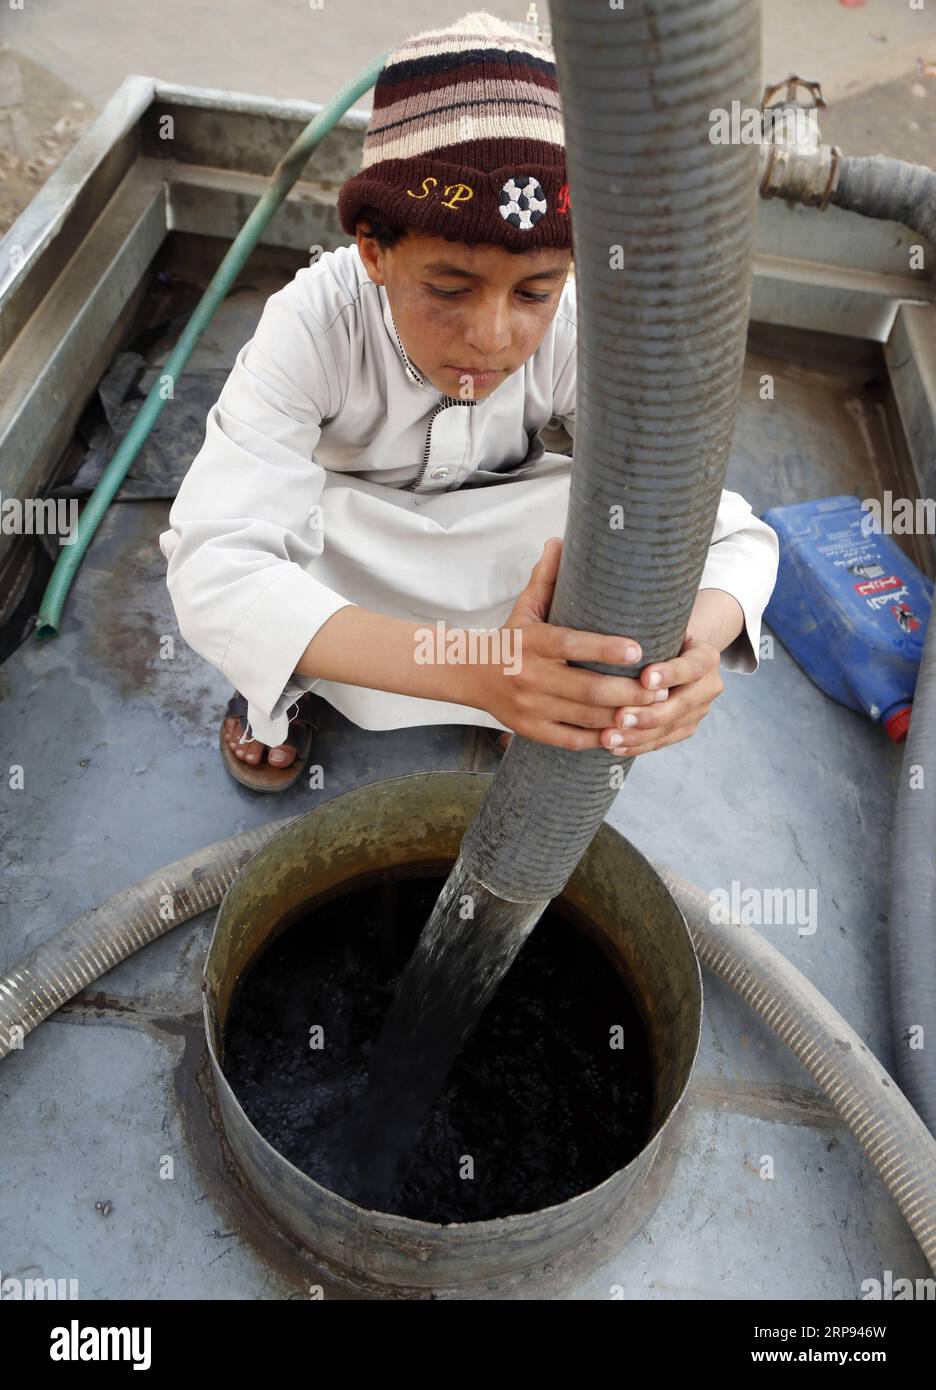 190322) -- SANAA, March 22, 2019 -- A boy fills his water truck with water  from a water pump in Sanaa, Yemen, on March 22, 2019, which is the World  Water Day.